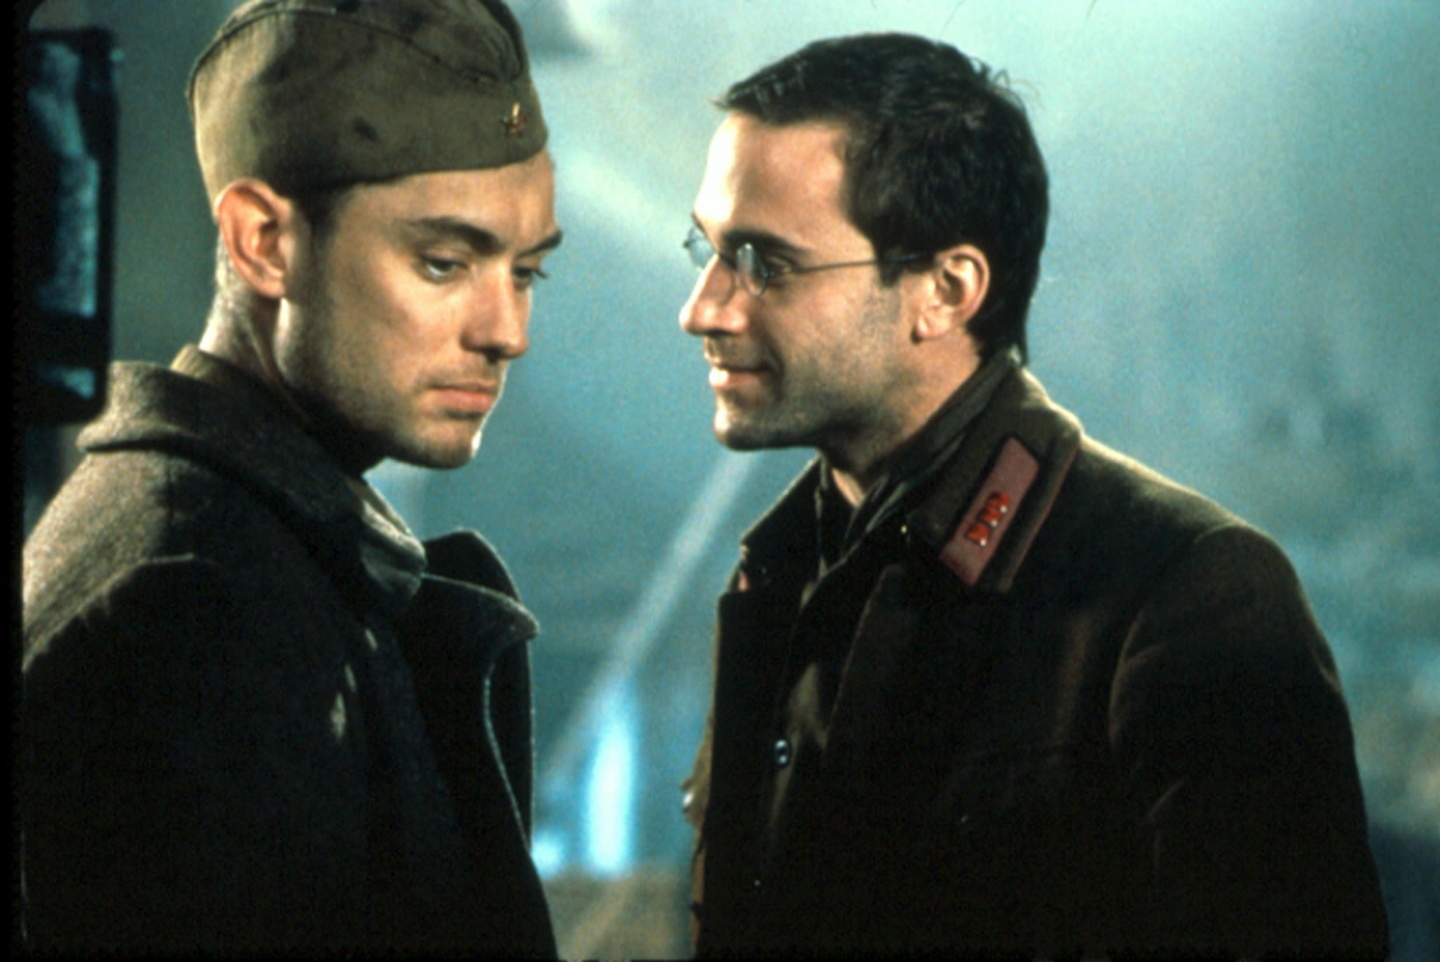 Duell - Enemy at the Gates / Jude Law / Joseph Fiennes